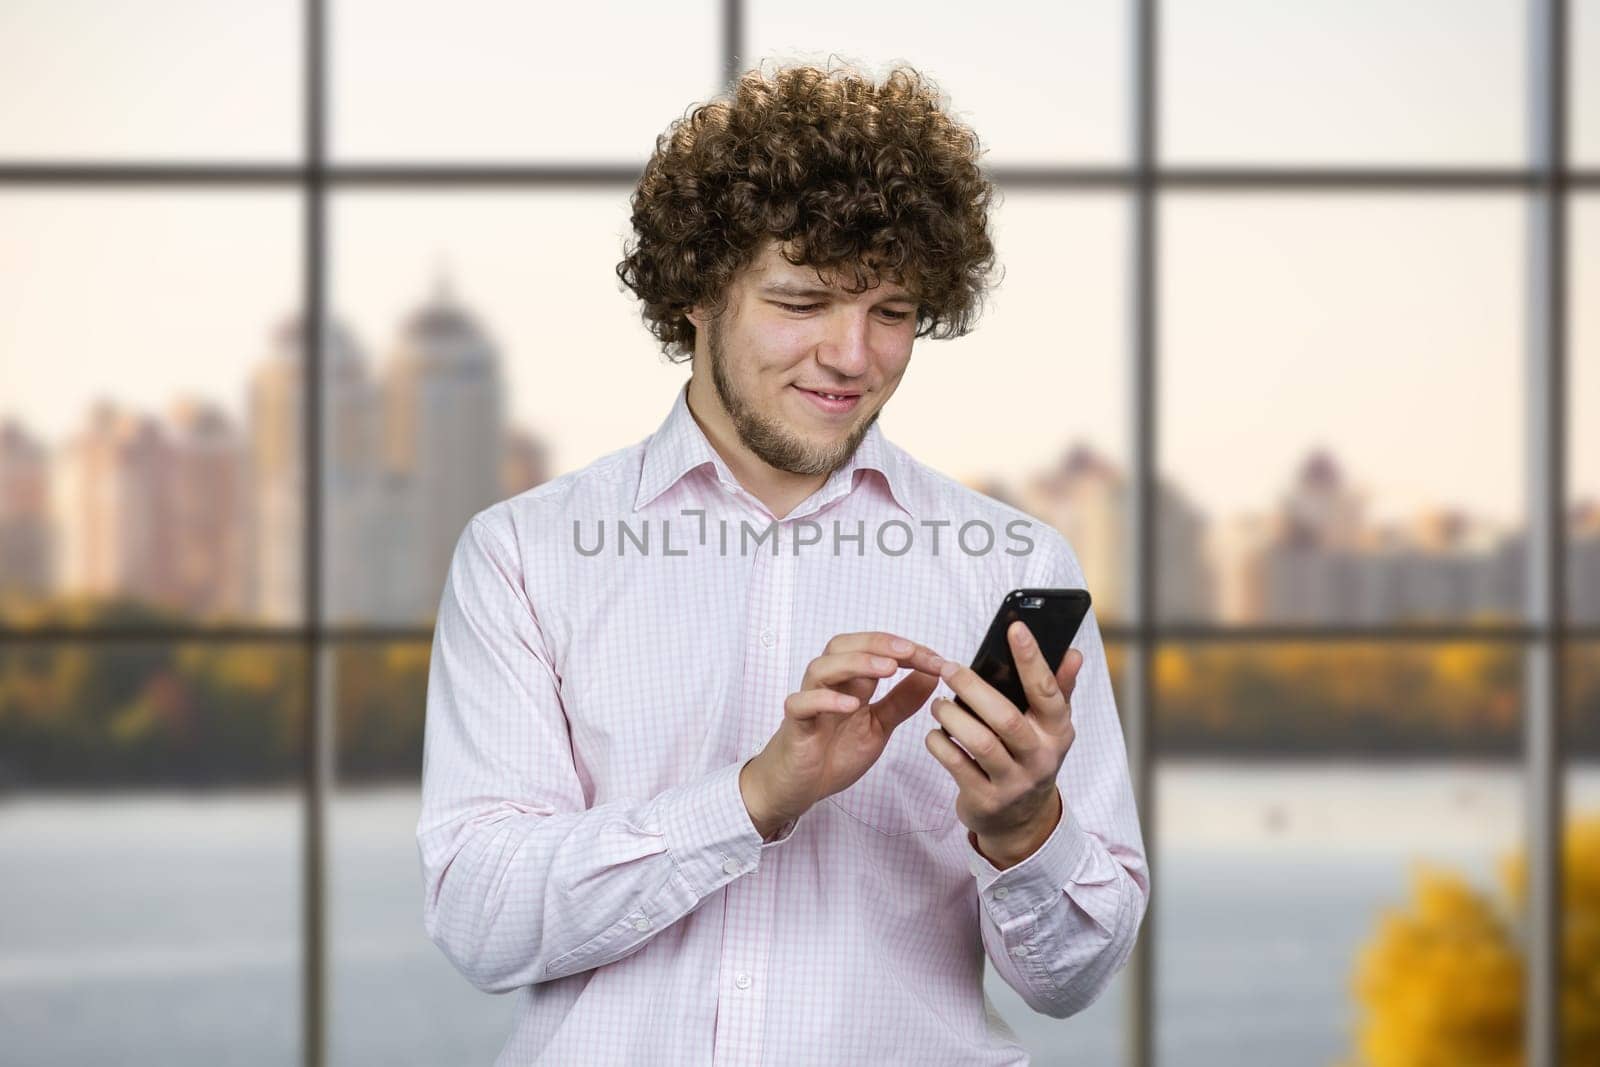 Portrait of a young smiling man with curly hair taps his smartphone. Indoor window with city river view.